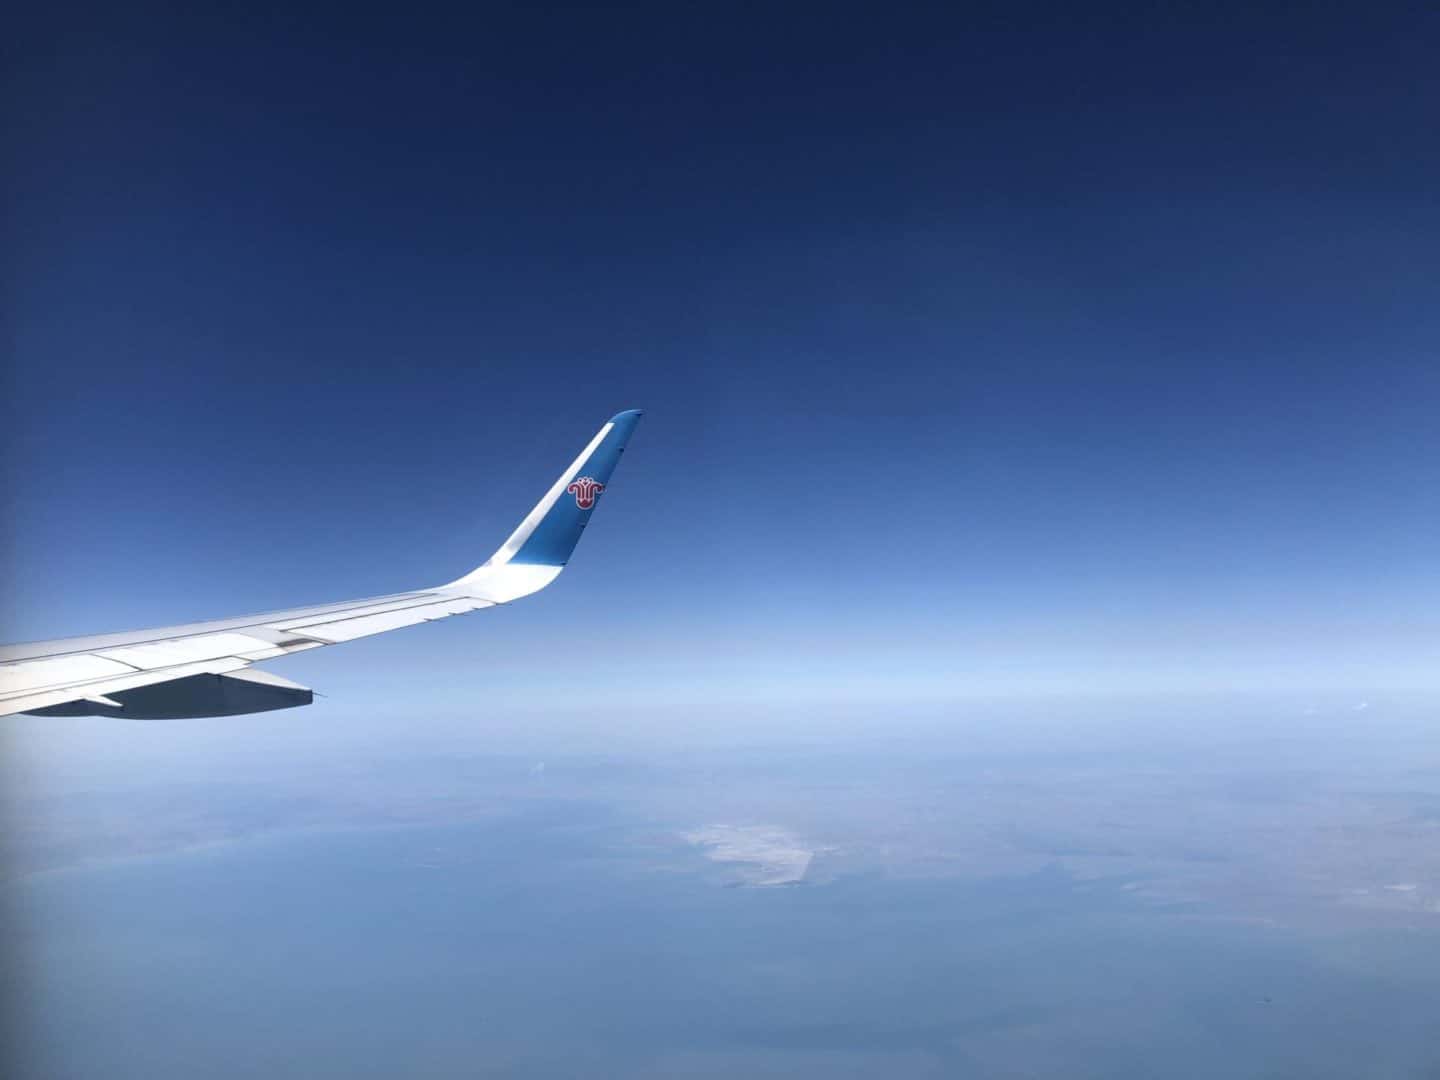 Southern China Airlines flight wing over the ocean